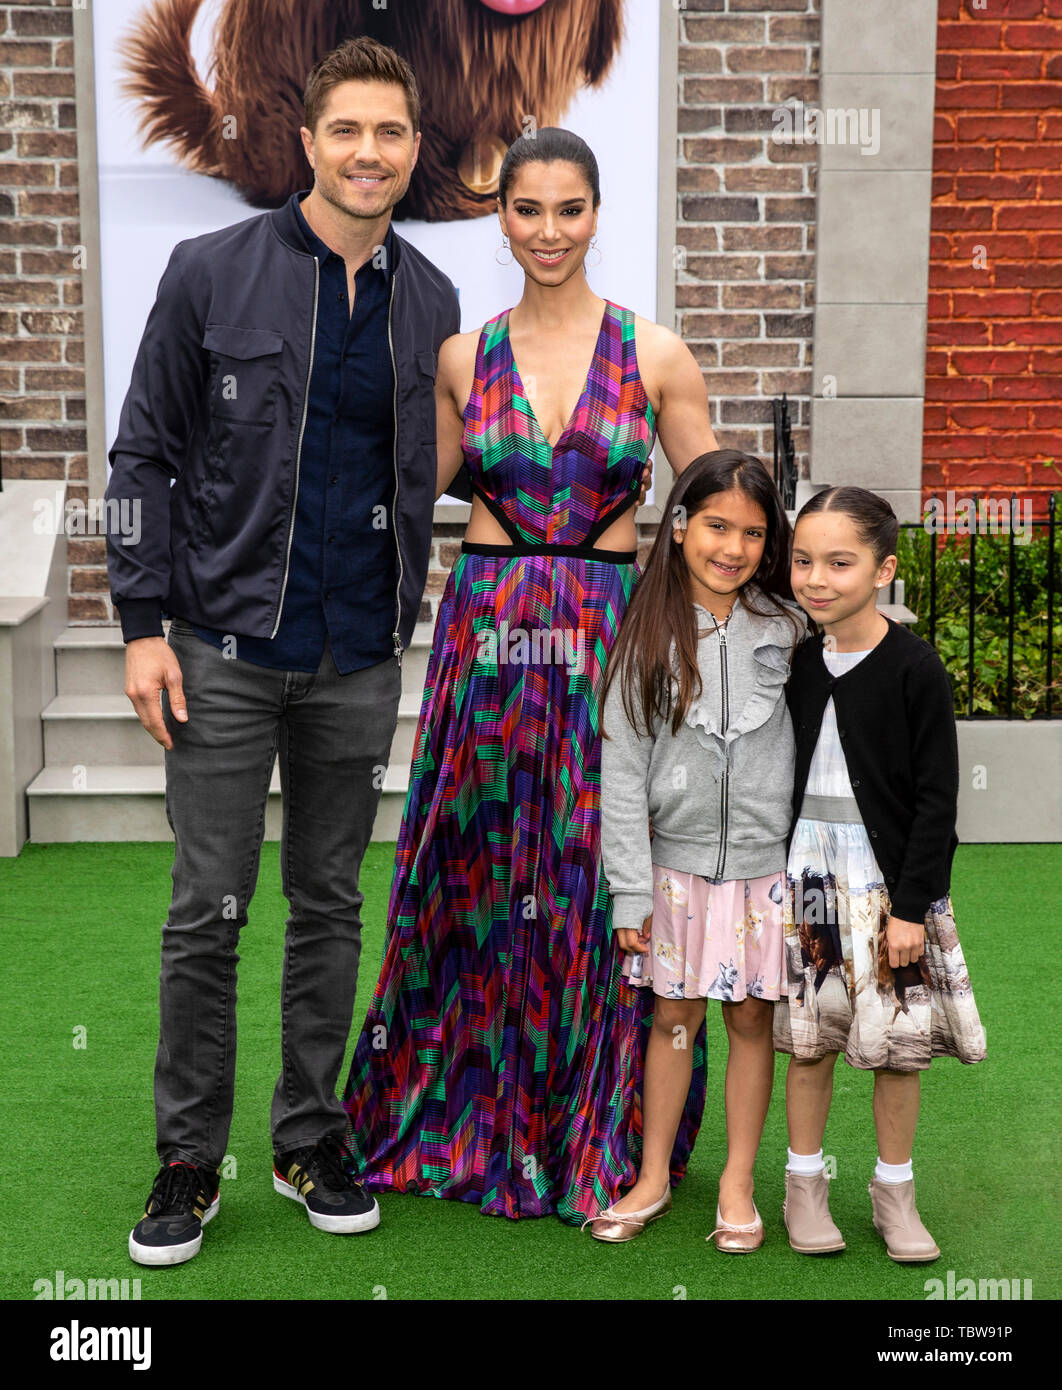 Los Angeles, CA - June 02, 2019: Eric Wynter, Roselyn Sanchez and ...